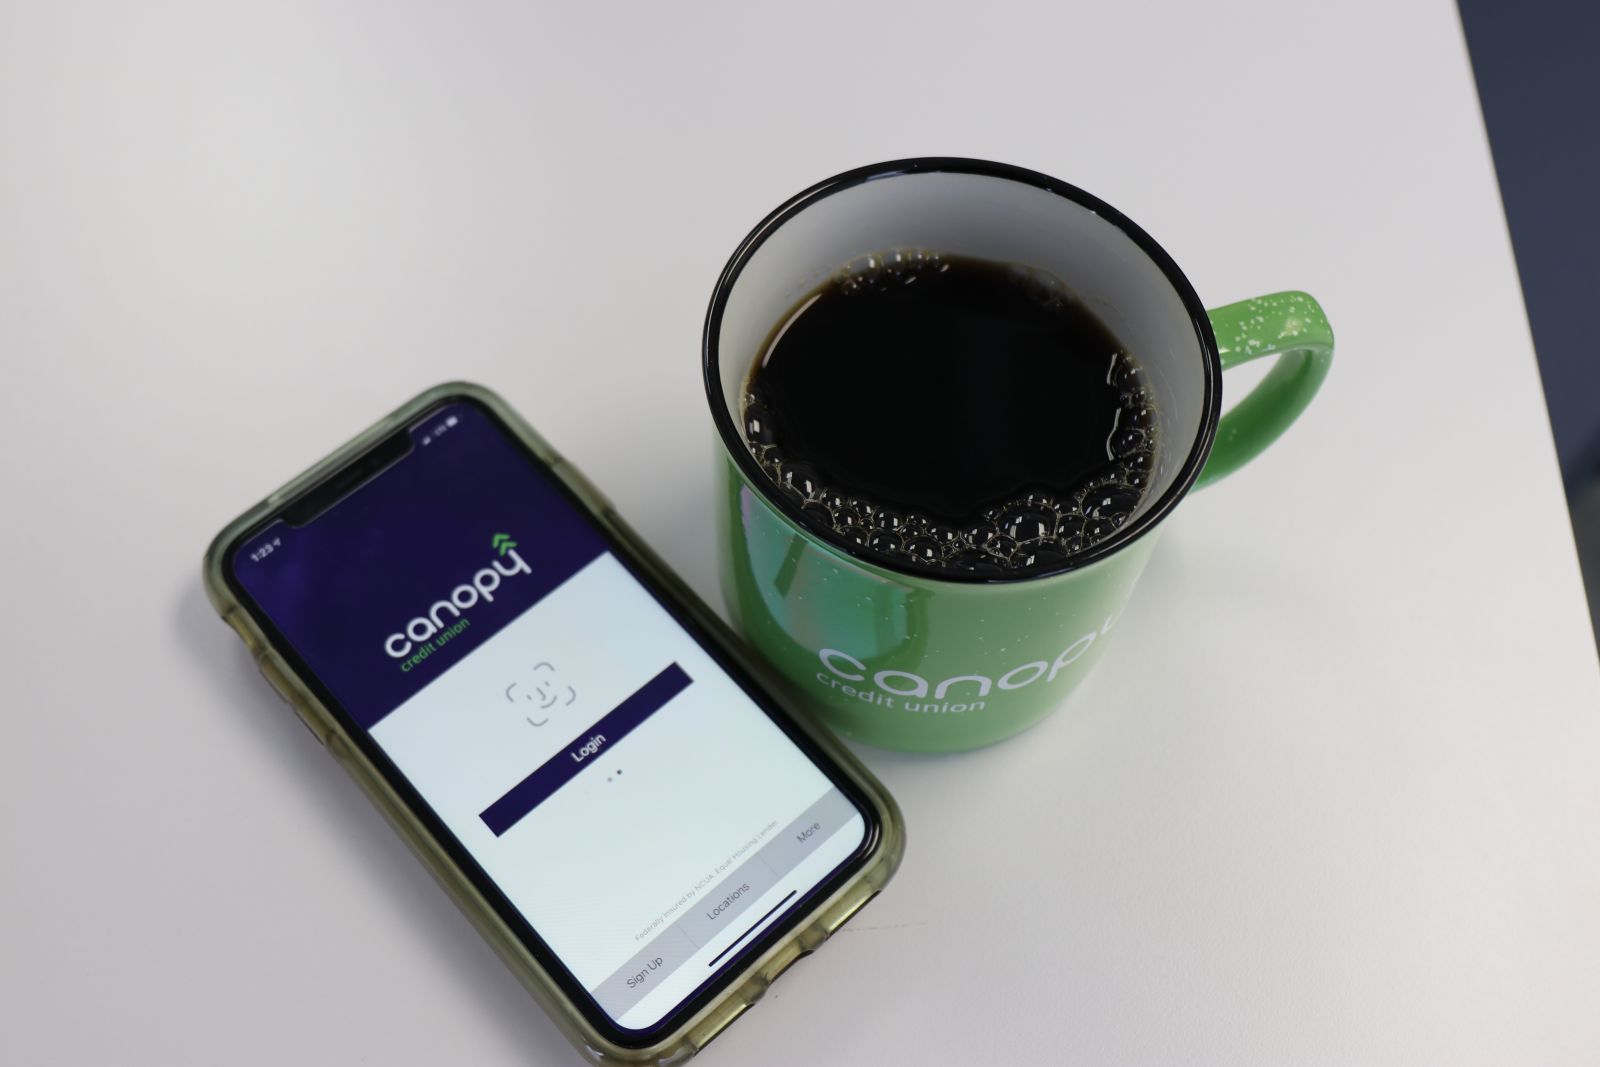 phone with canopy app open next to cup of coffee